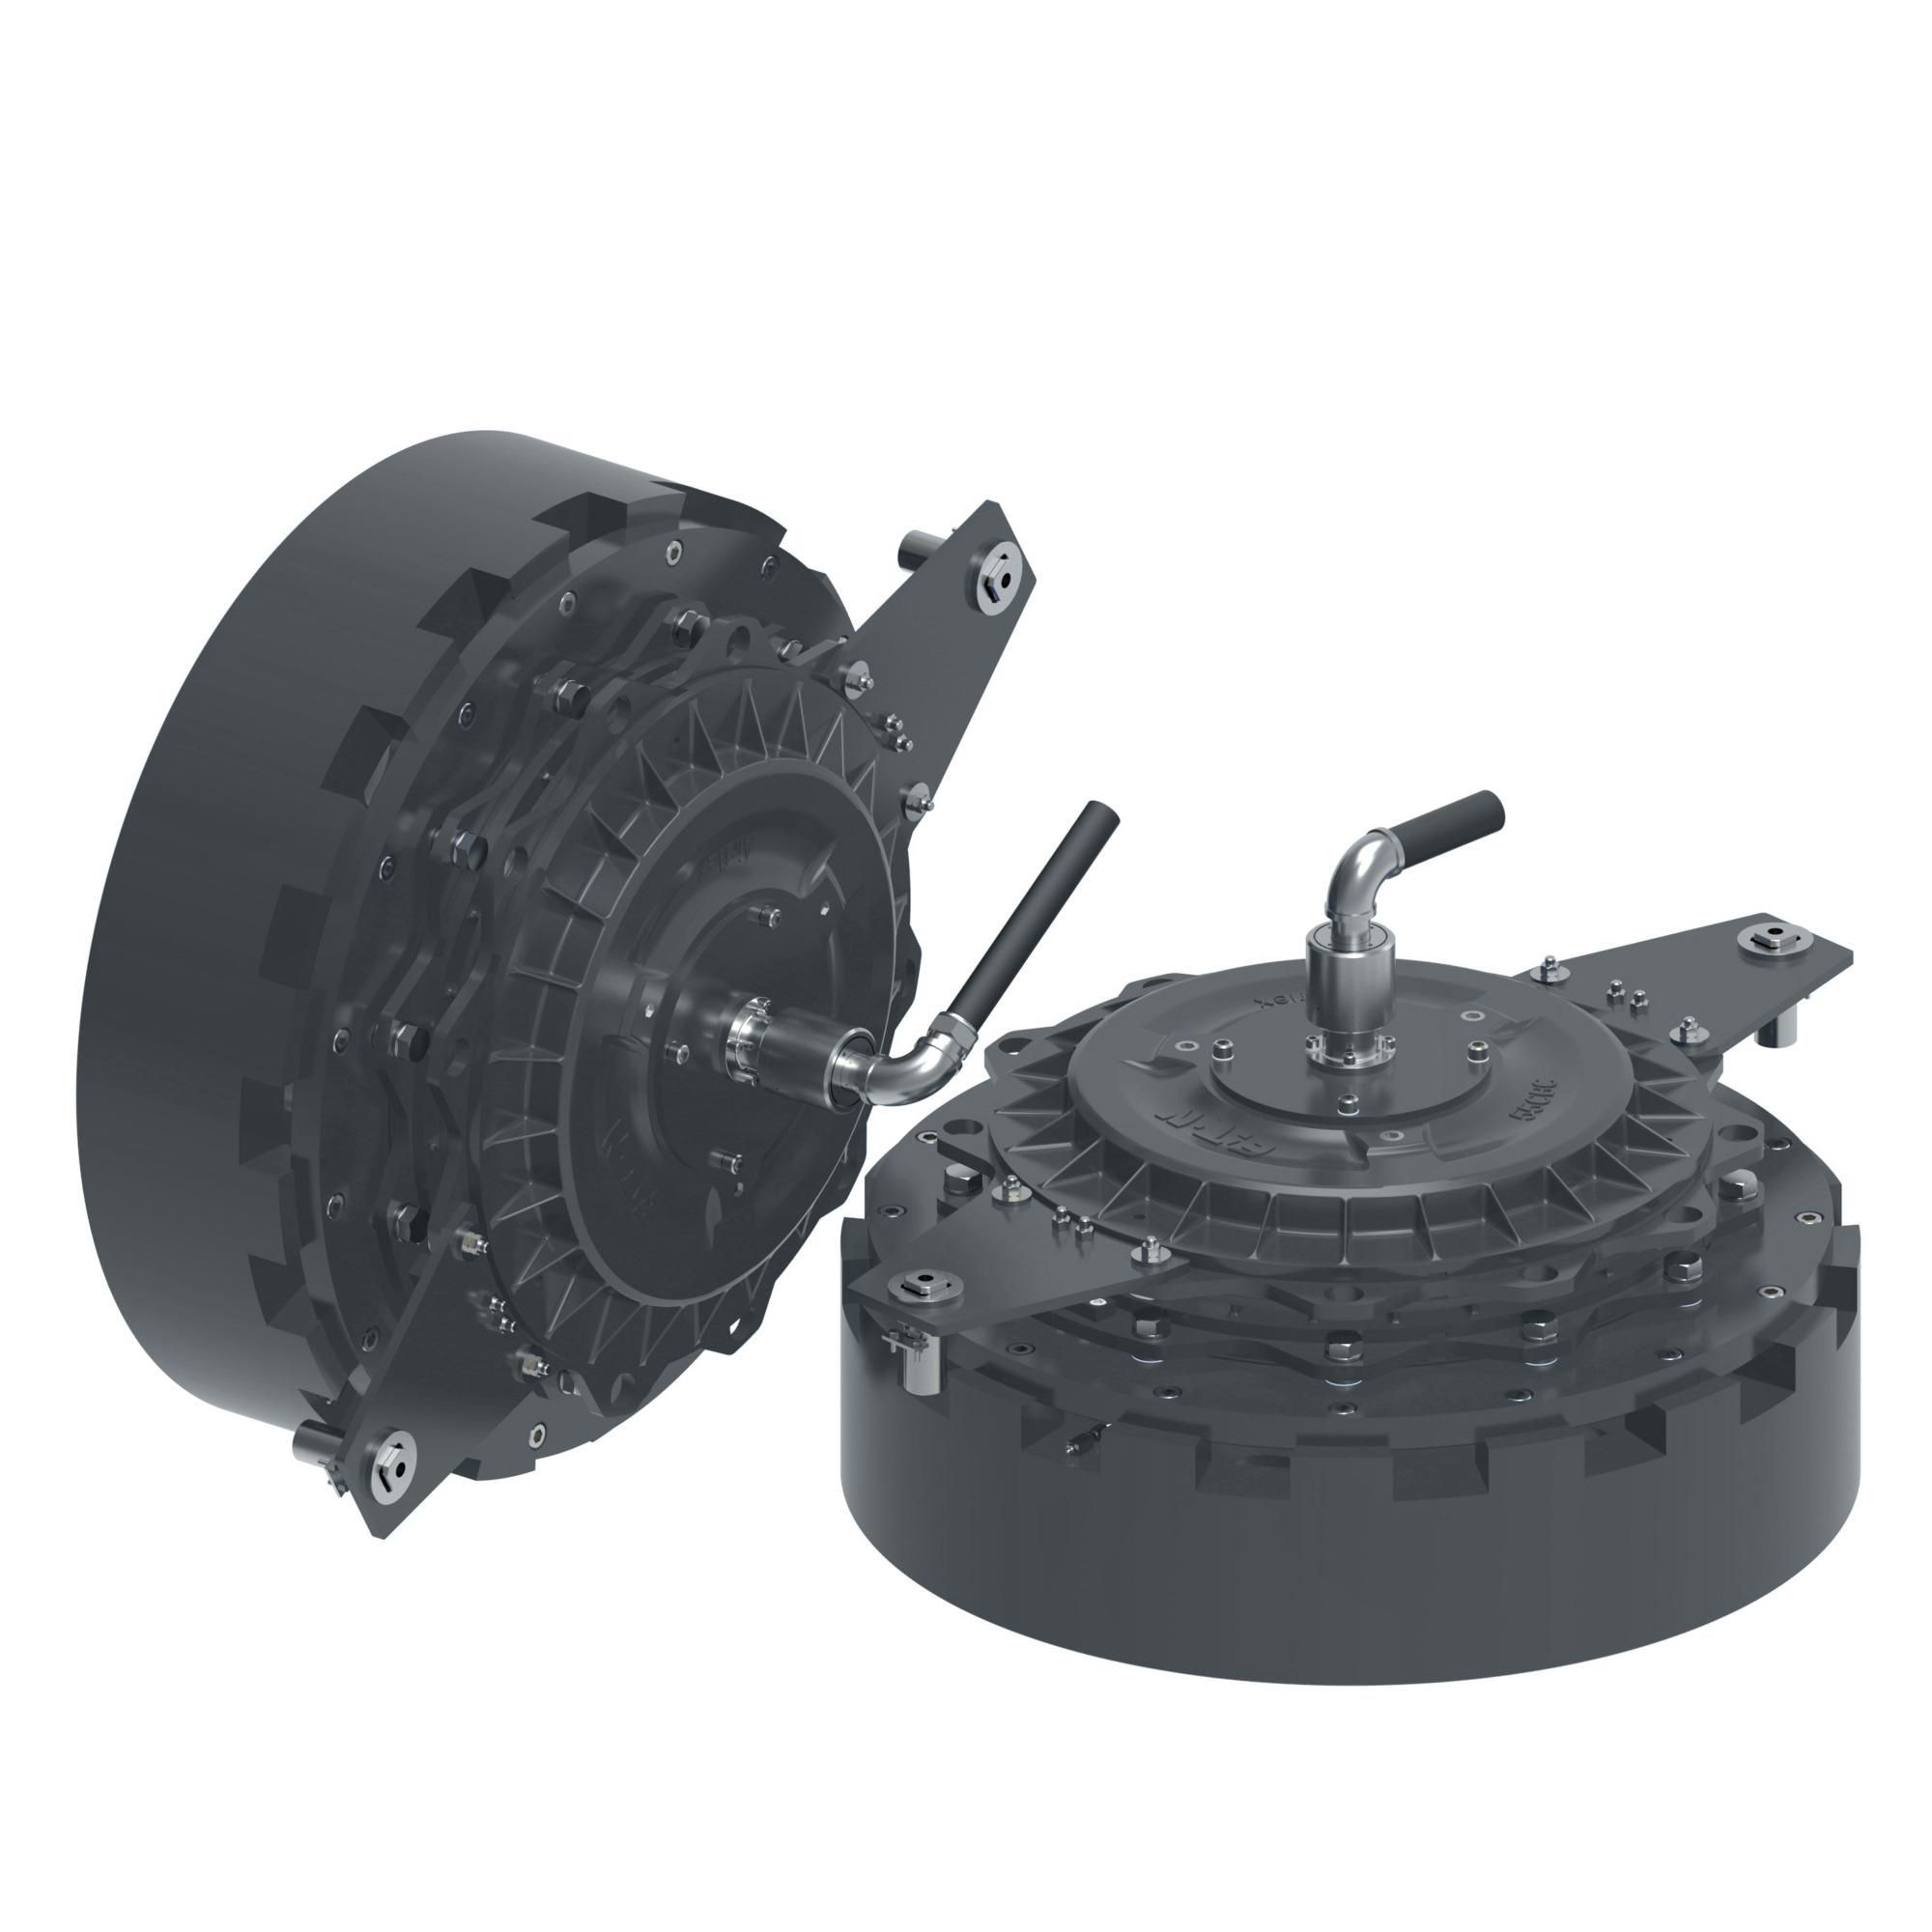 Combination clutch brake-product-category